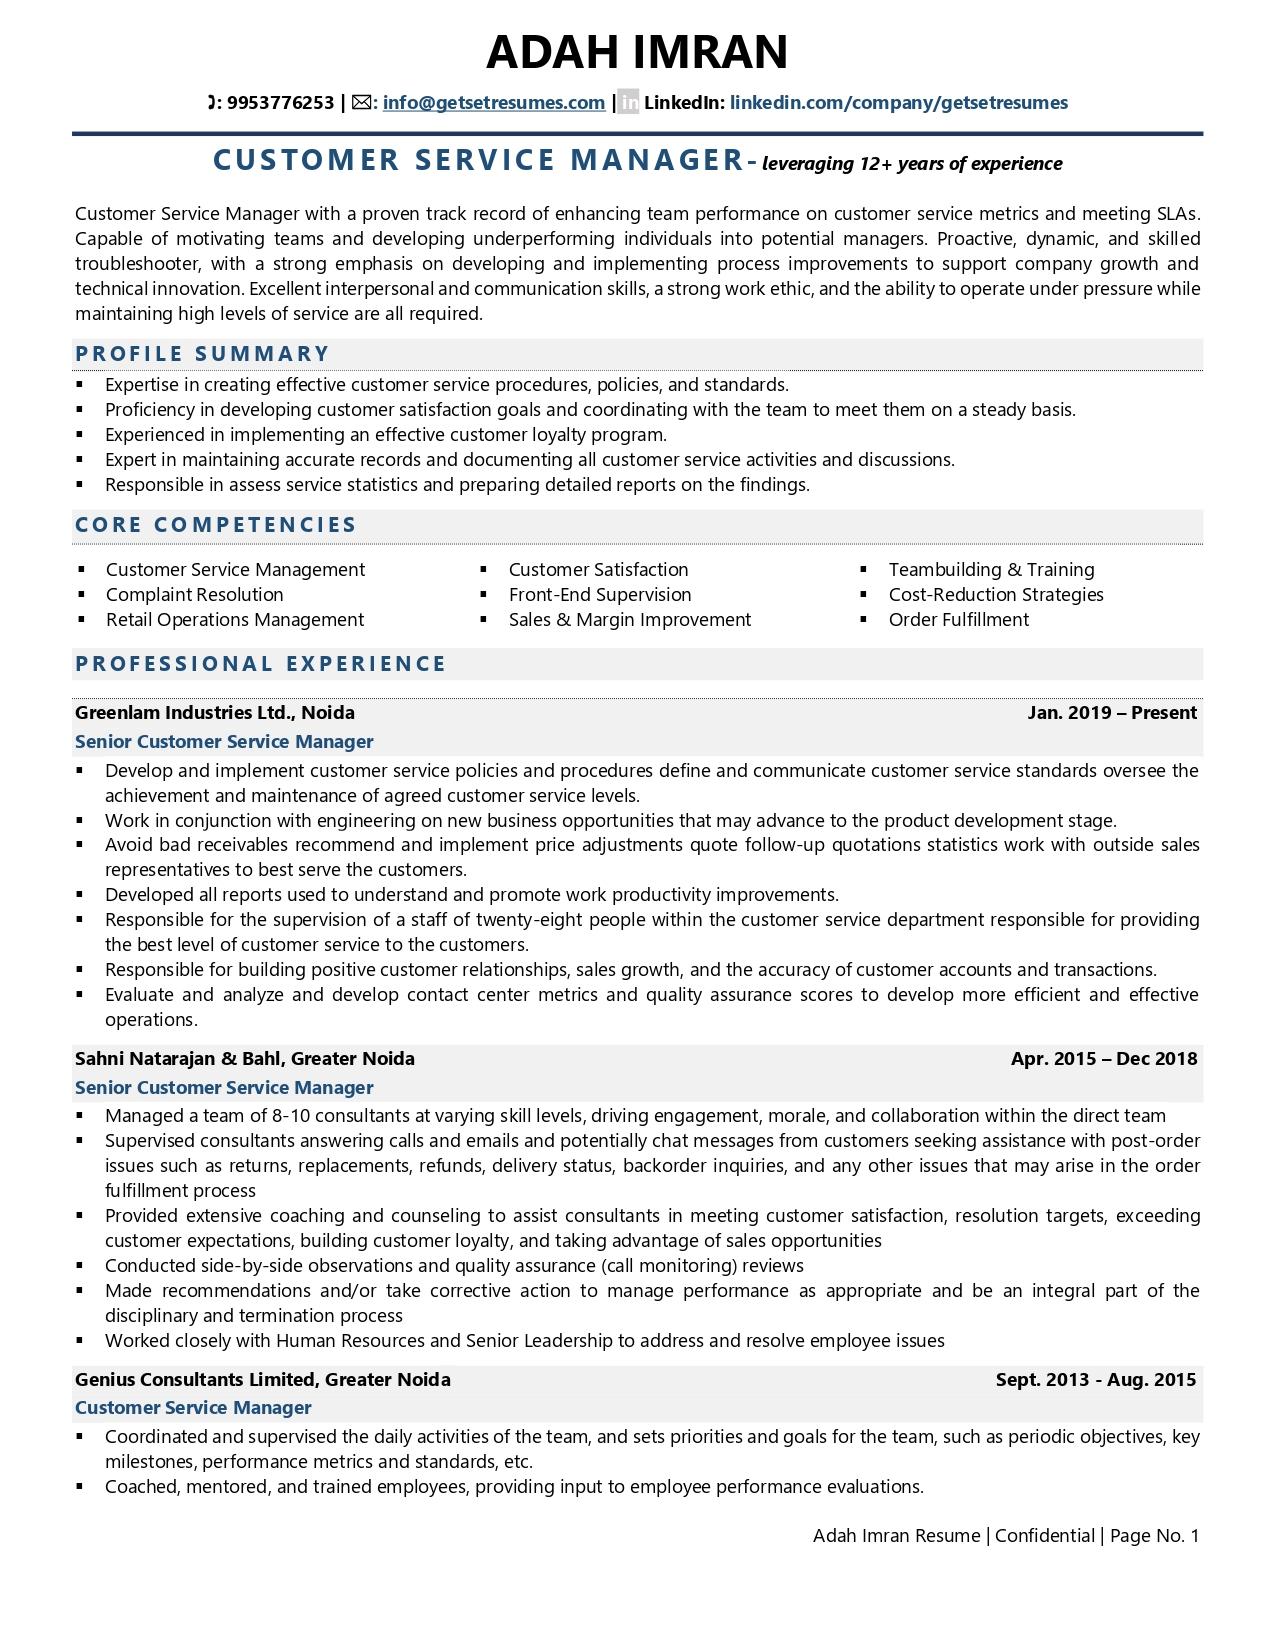 Customer Service Manager - Resume Example & Template